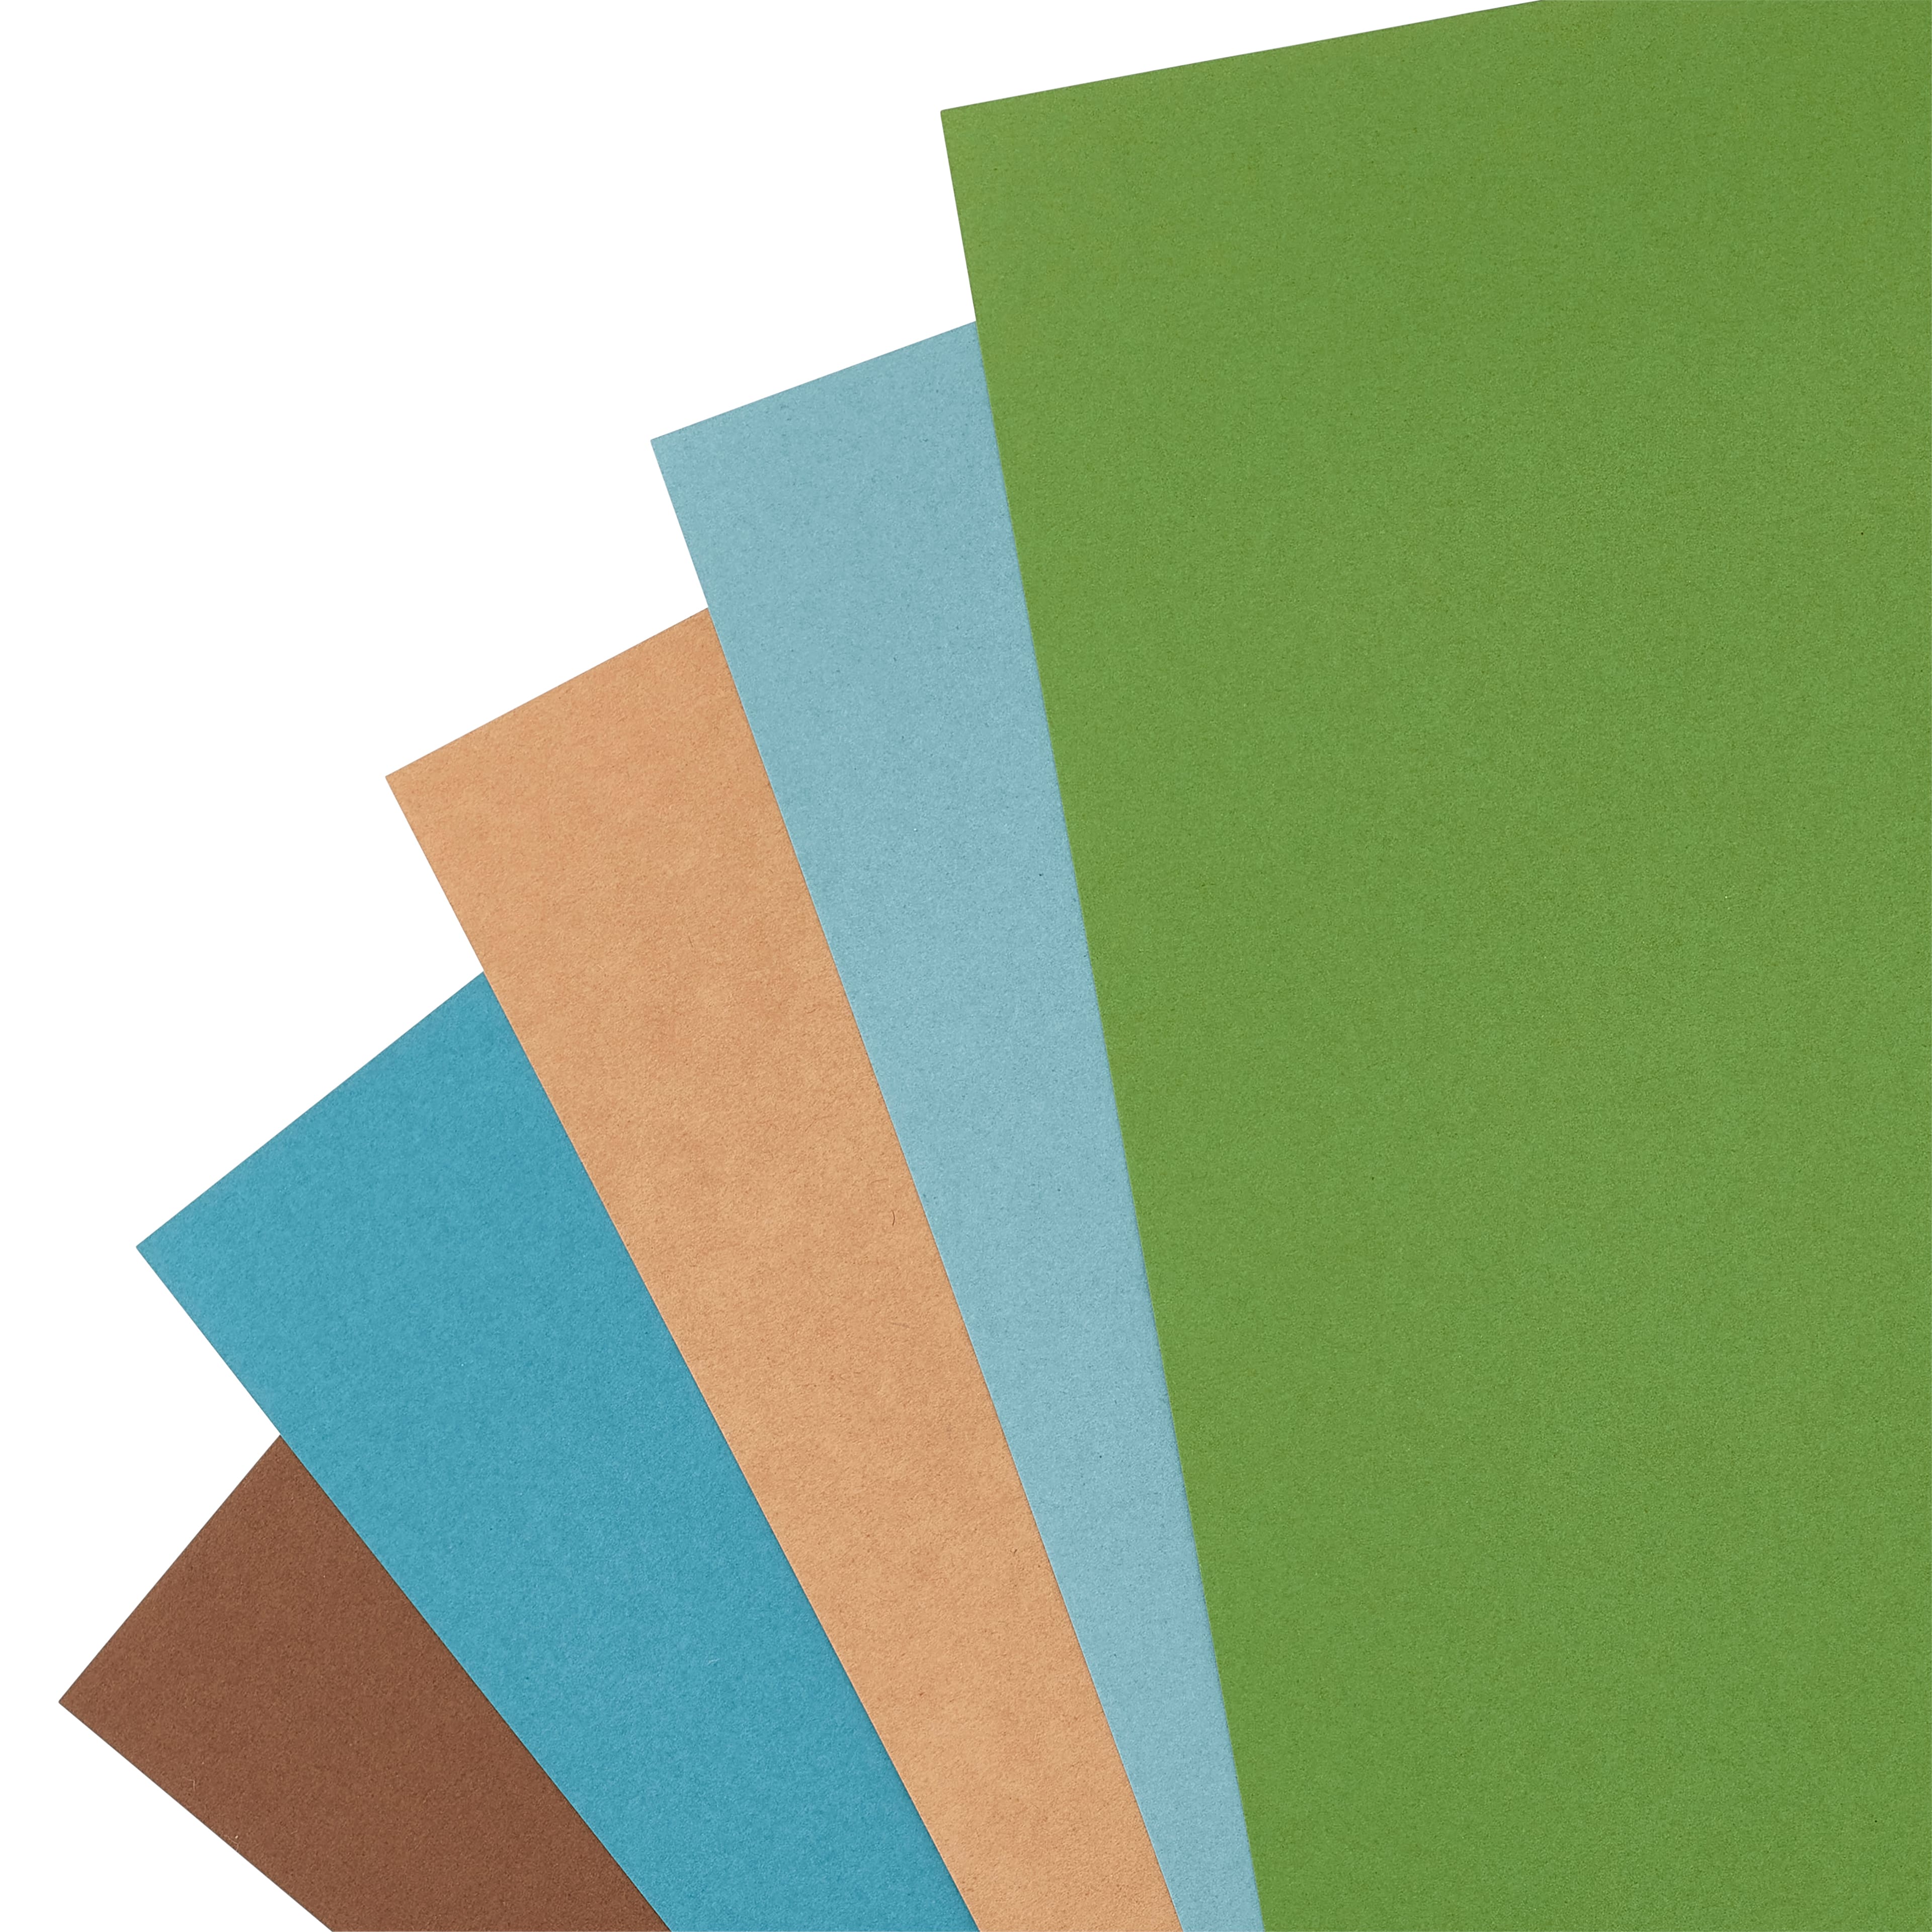 Earth 8.5 x 11 Cardstock Paper by Recollections®, 50 Sheets